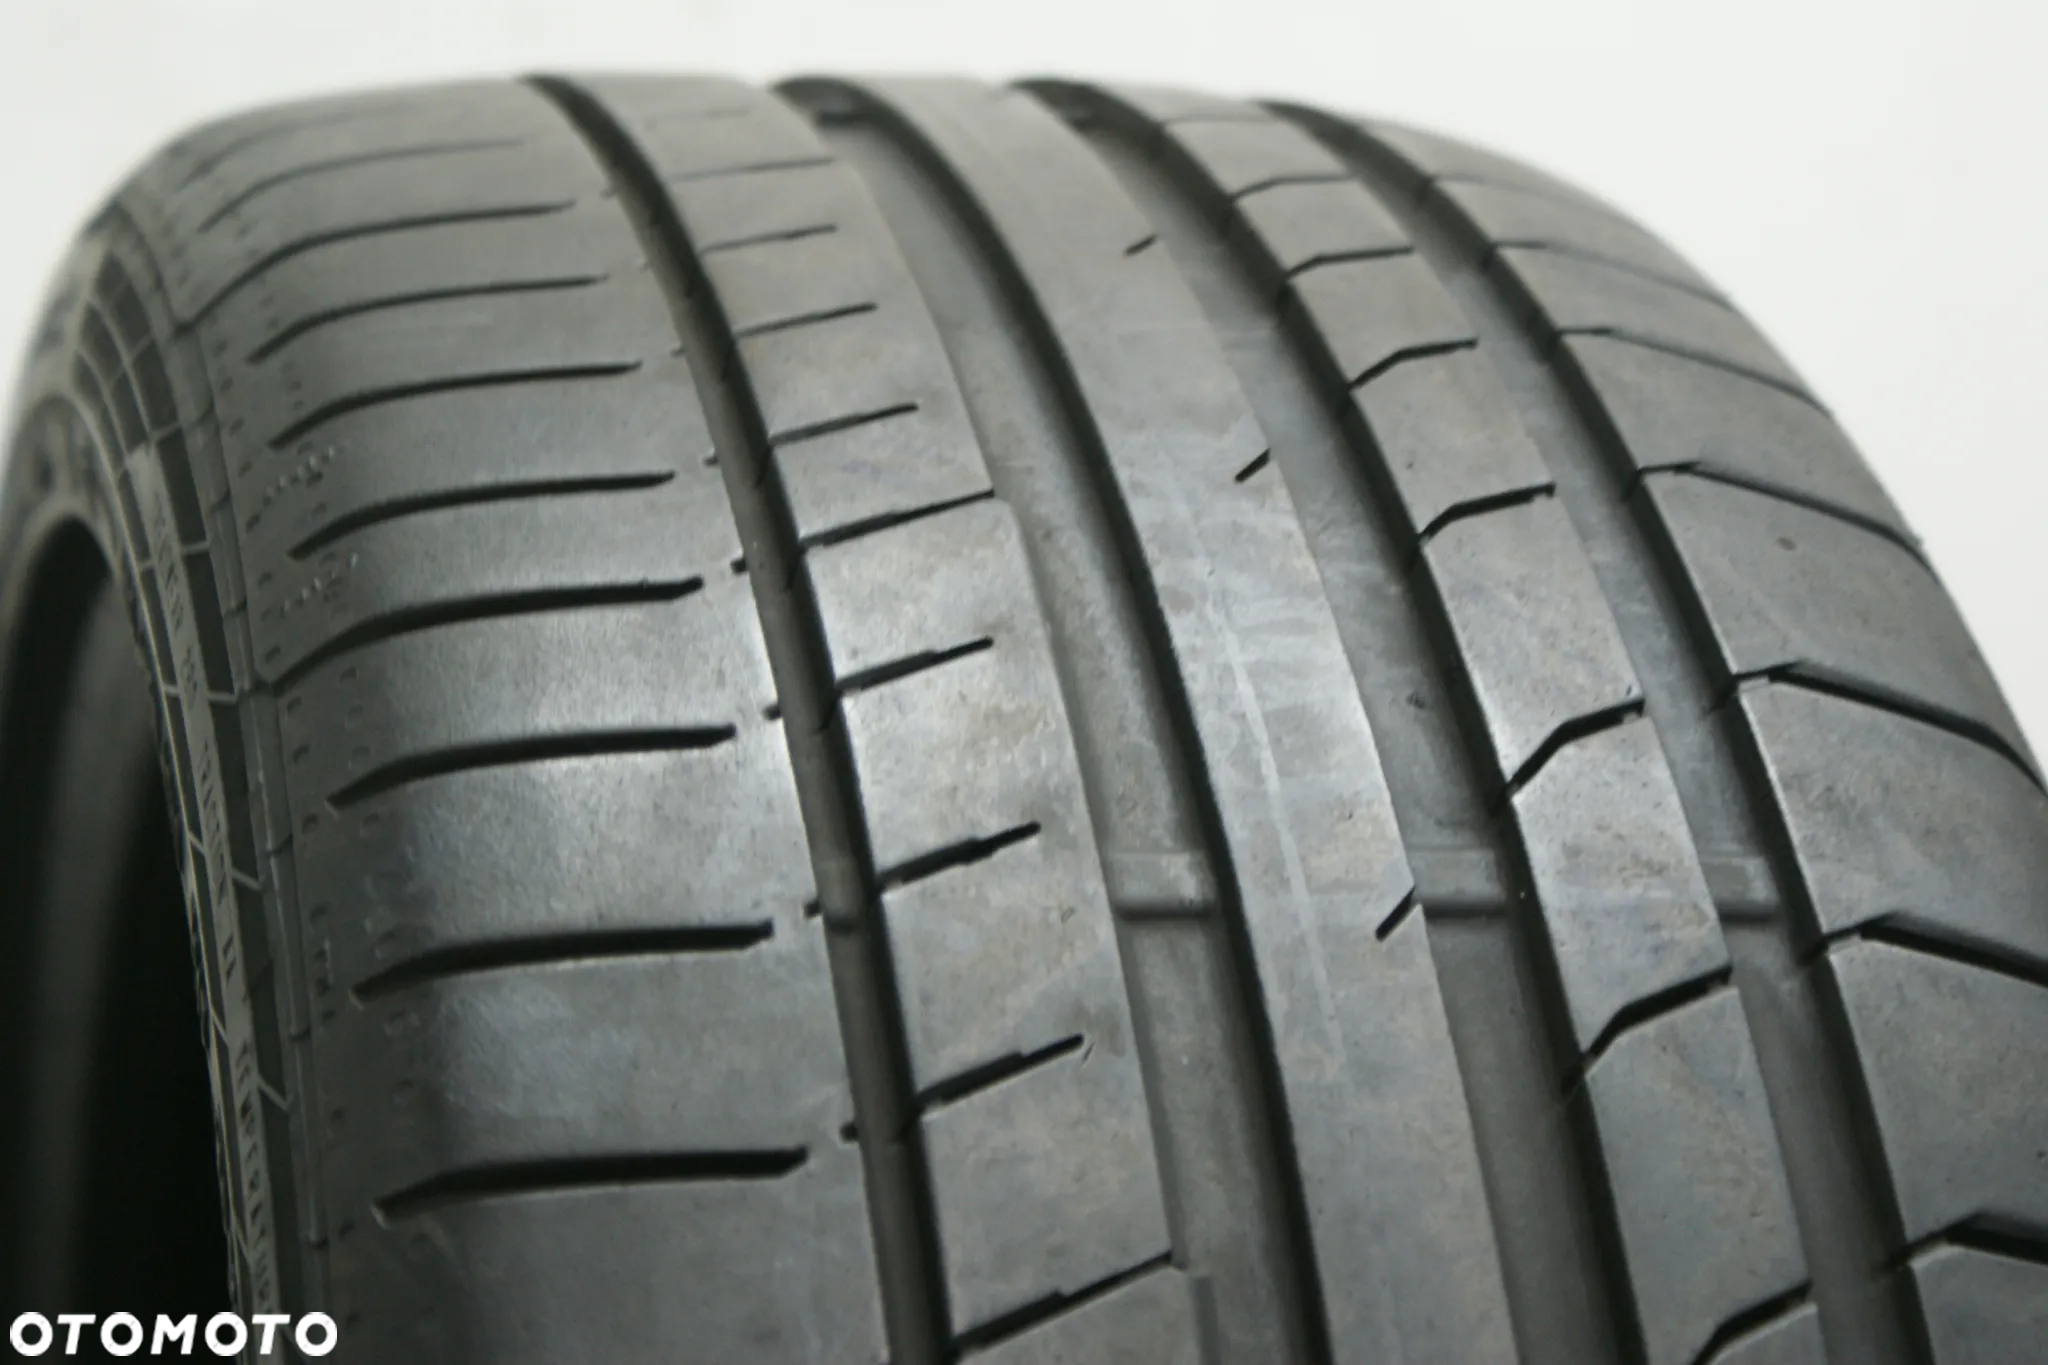 225/40R18 CONTINENTAL CONTISPORTCONTACT 5 , 6,7mm - 2